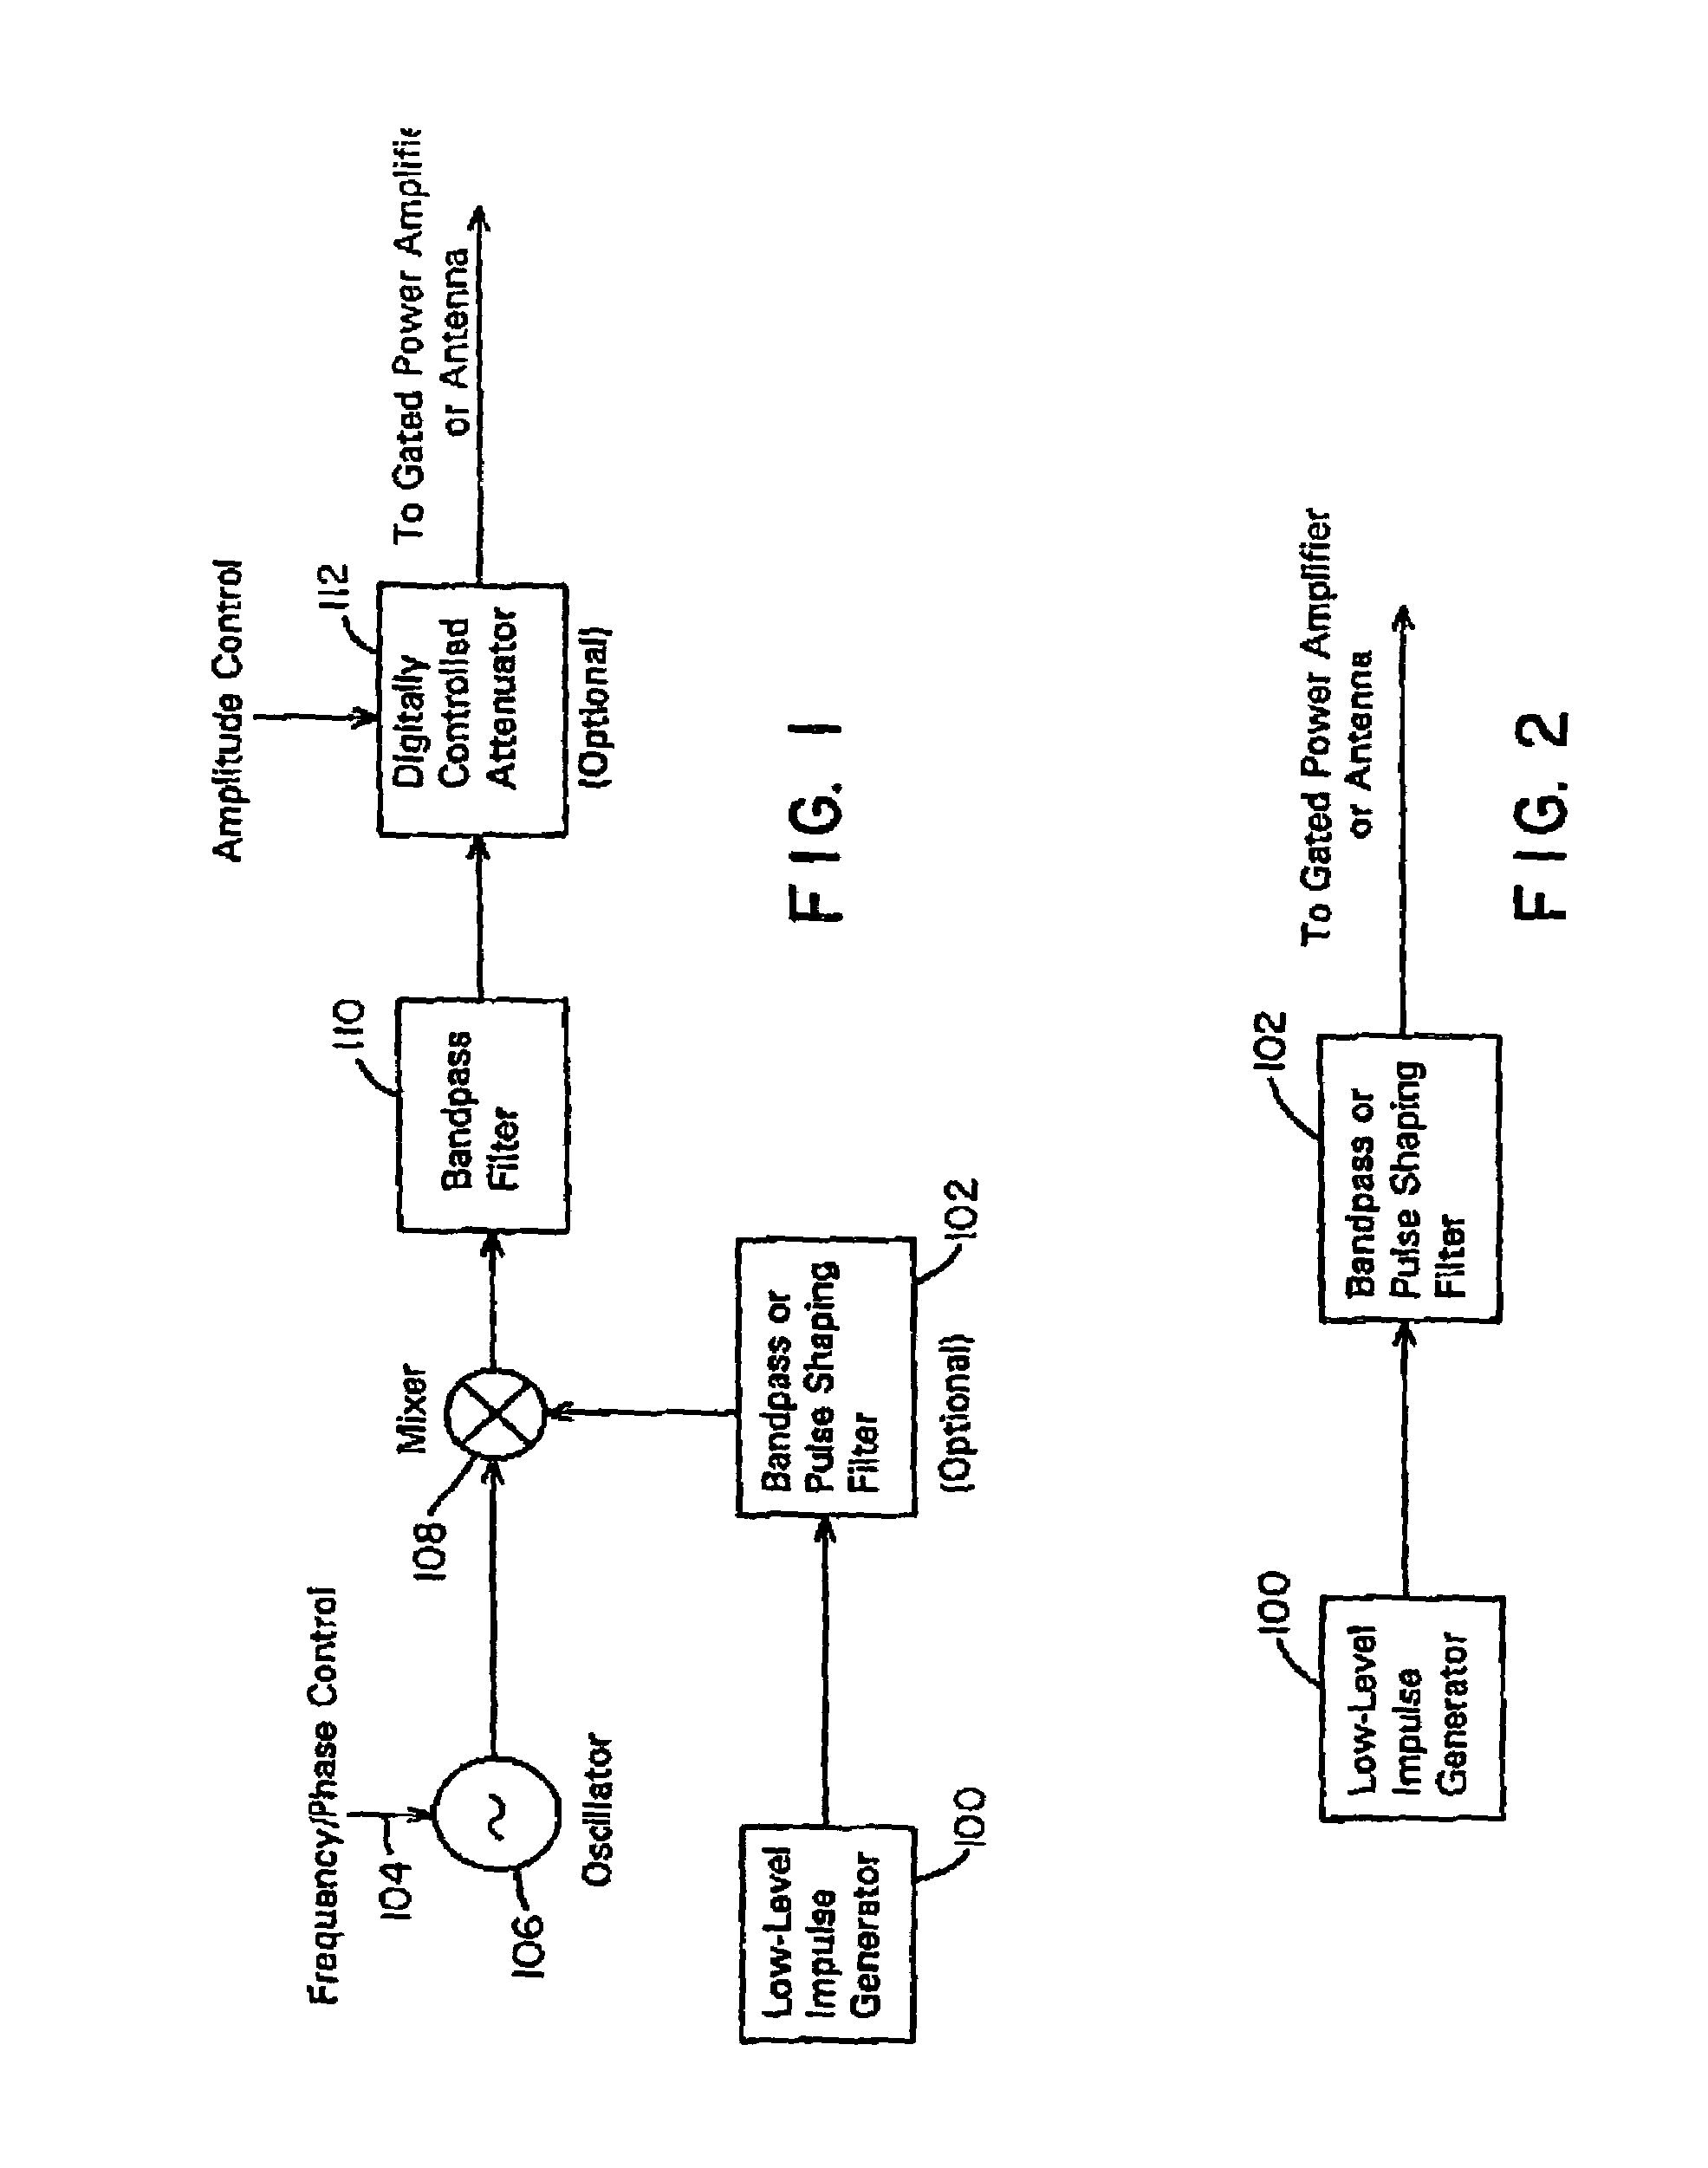 Ultra-wideband receiver and transmitter